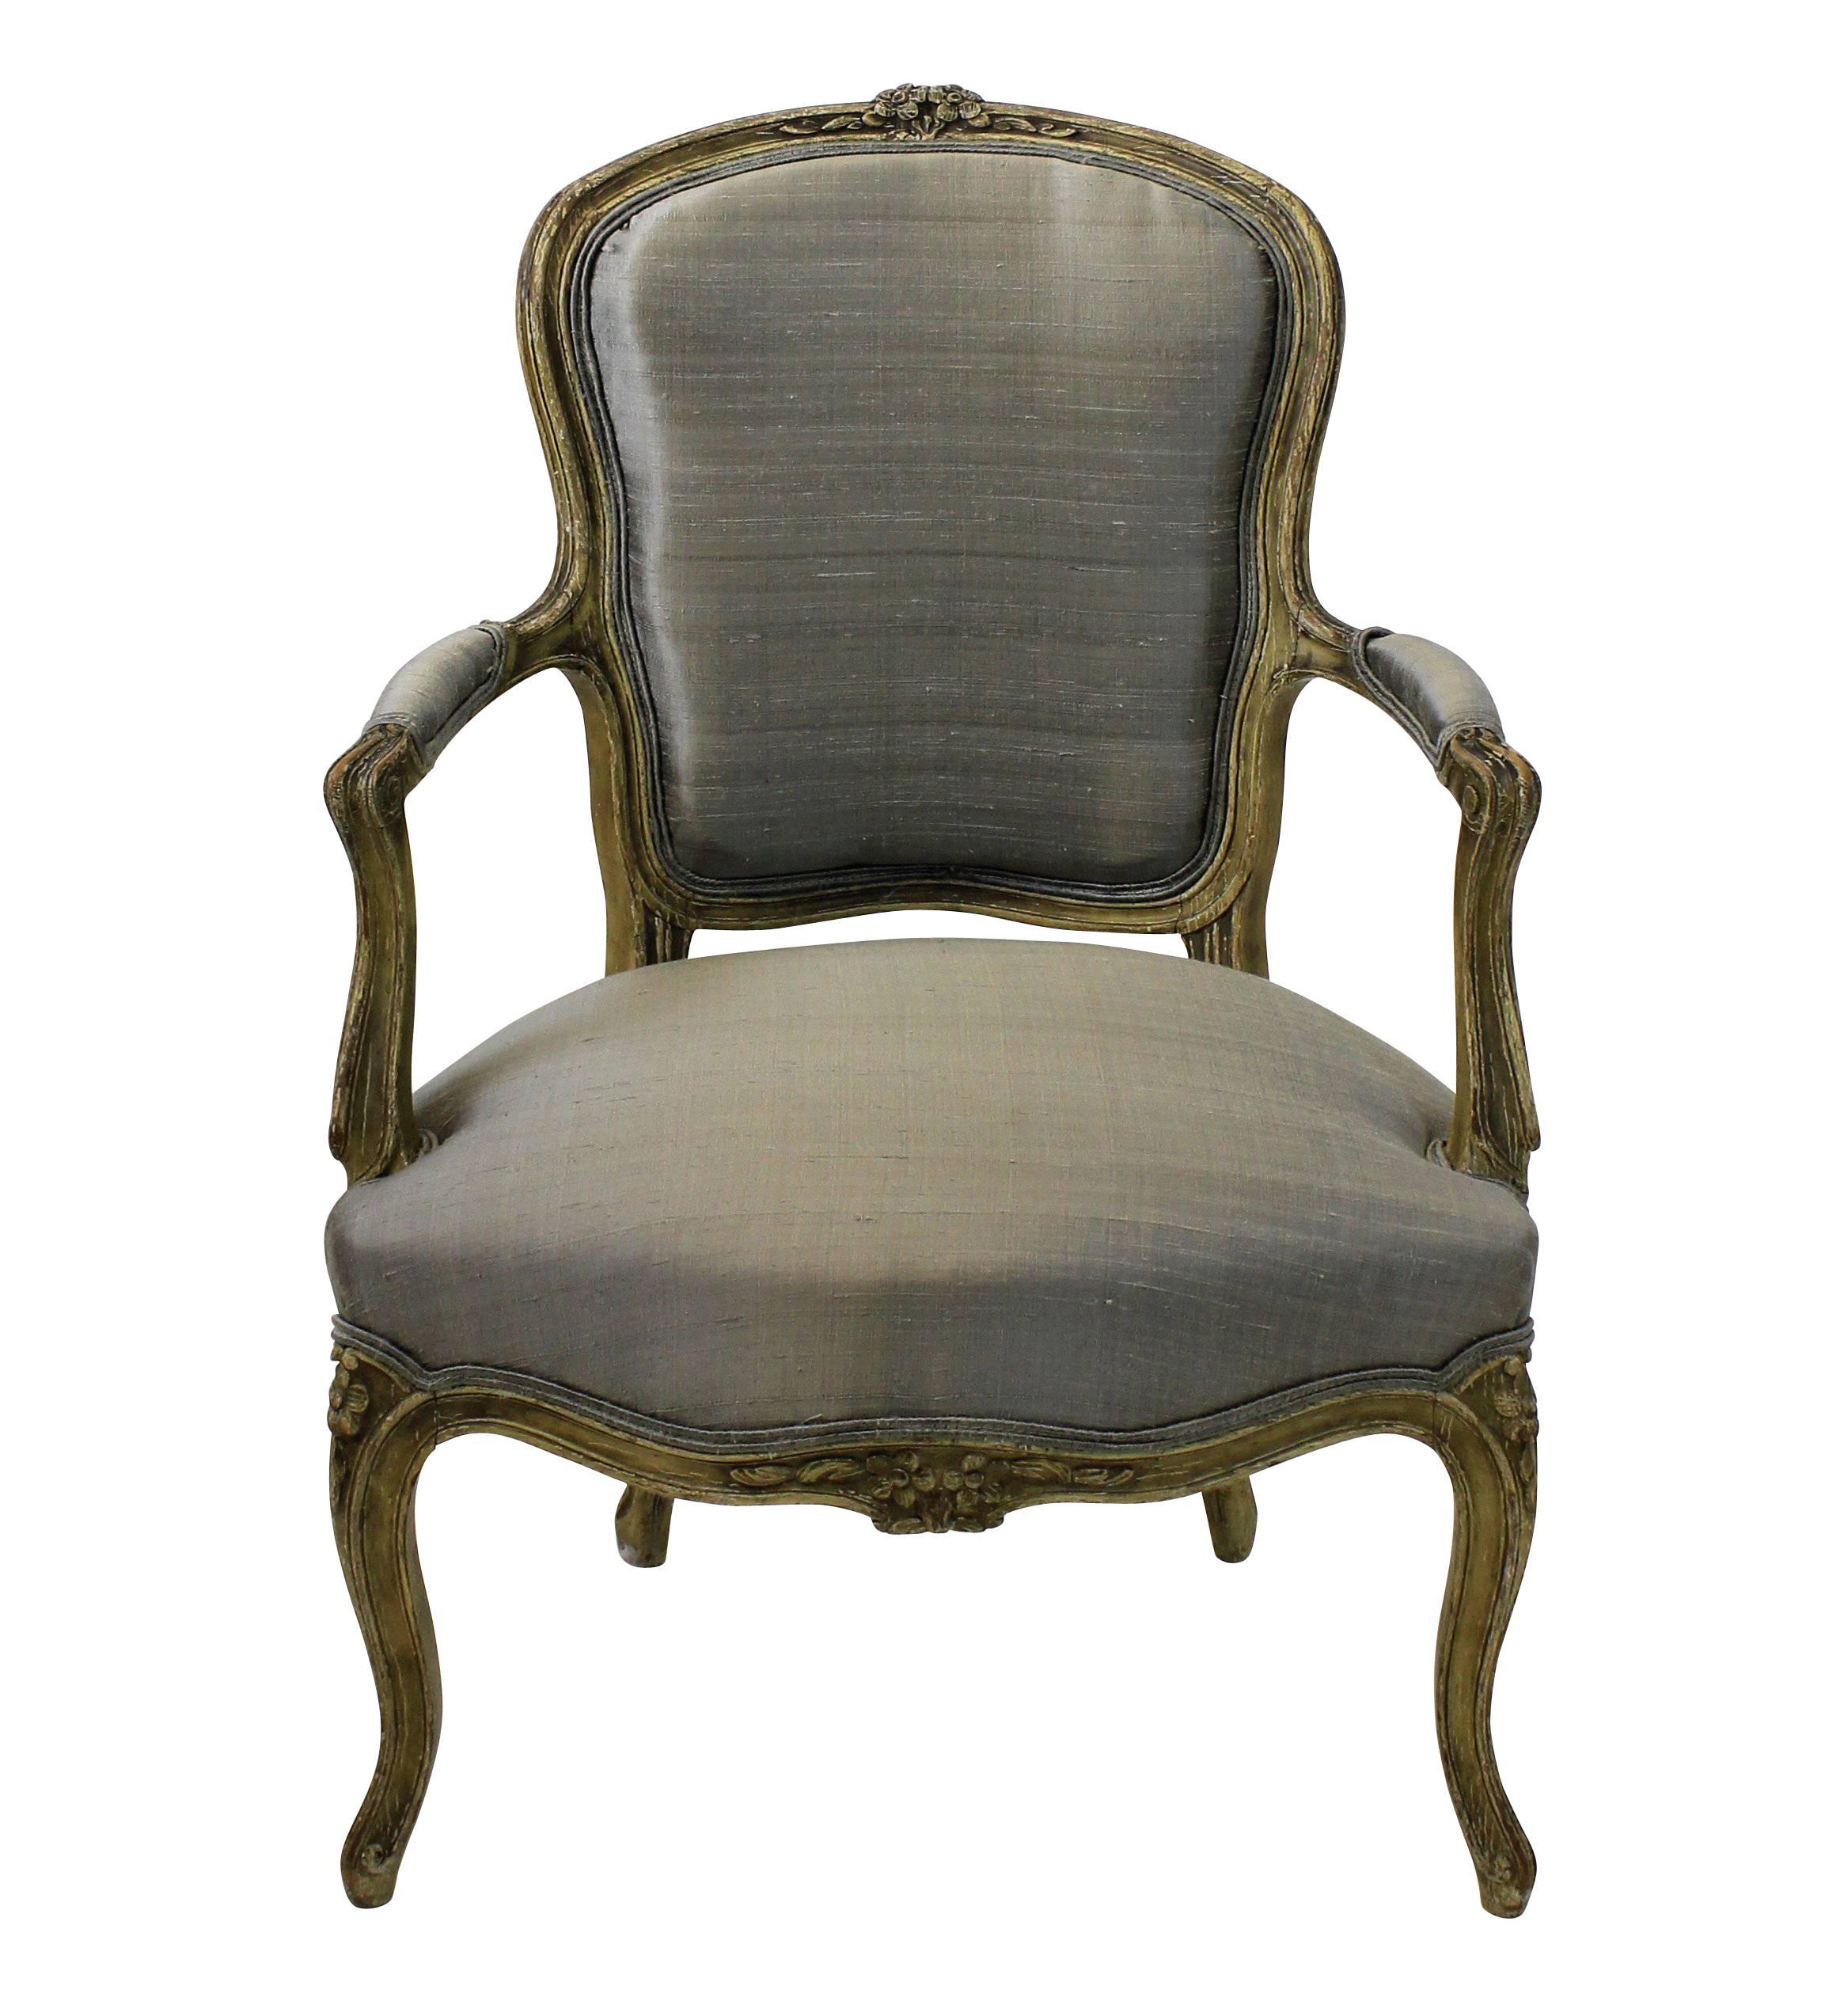 A pair of late 18th century French armchairs in their original paints. Newly upholstered with horsehair padding in stone colored dupion silk.